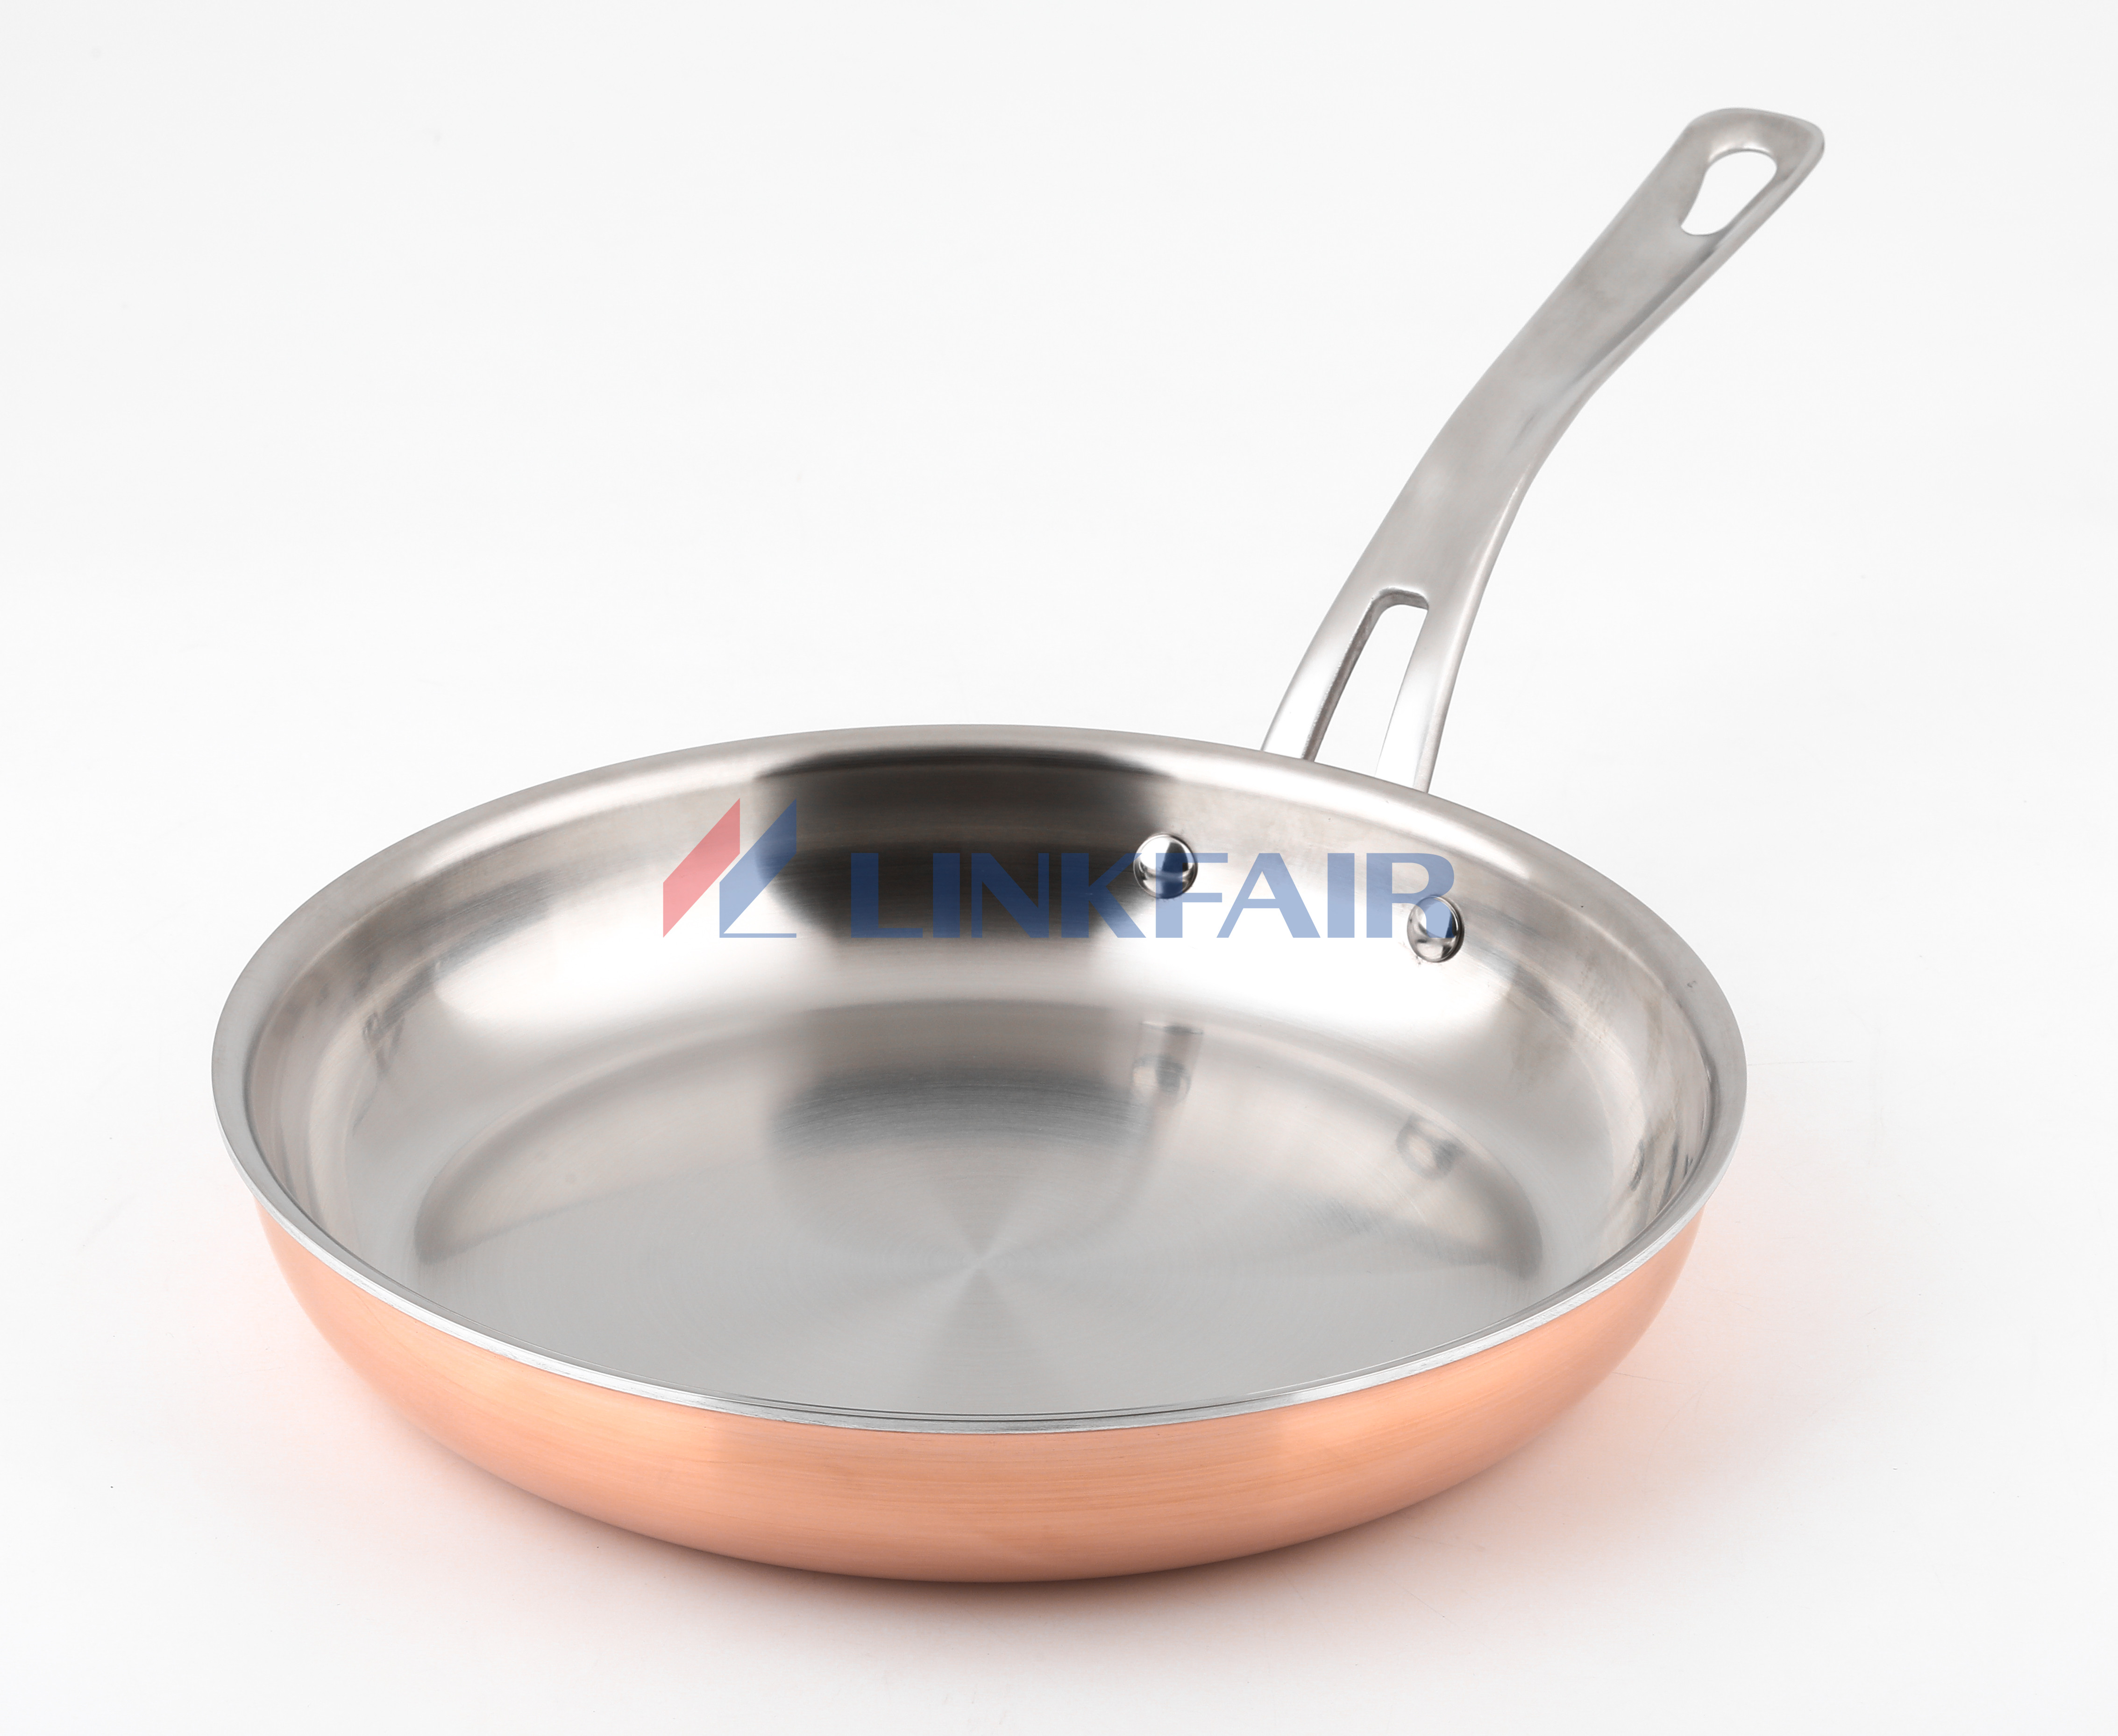 Tri-ply Copper Frying pan, Induction Ready